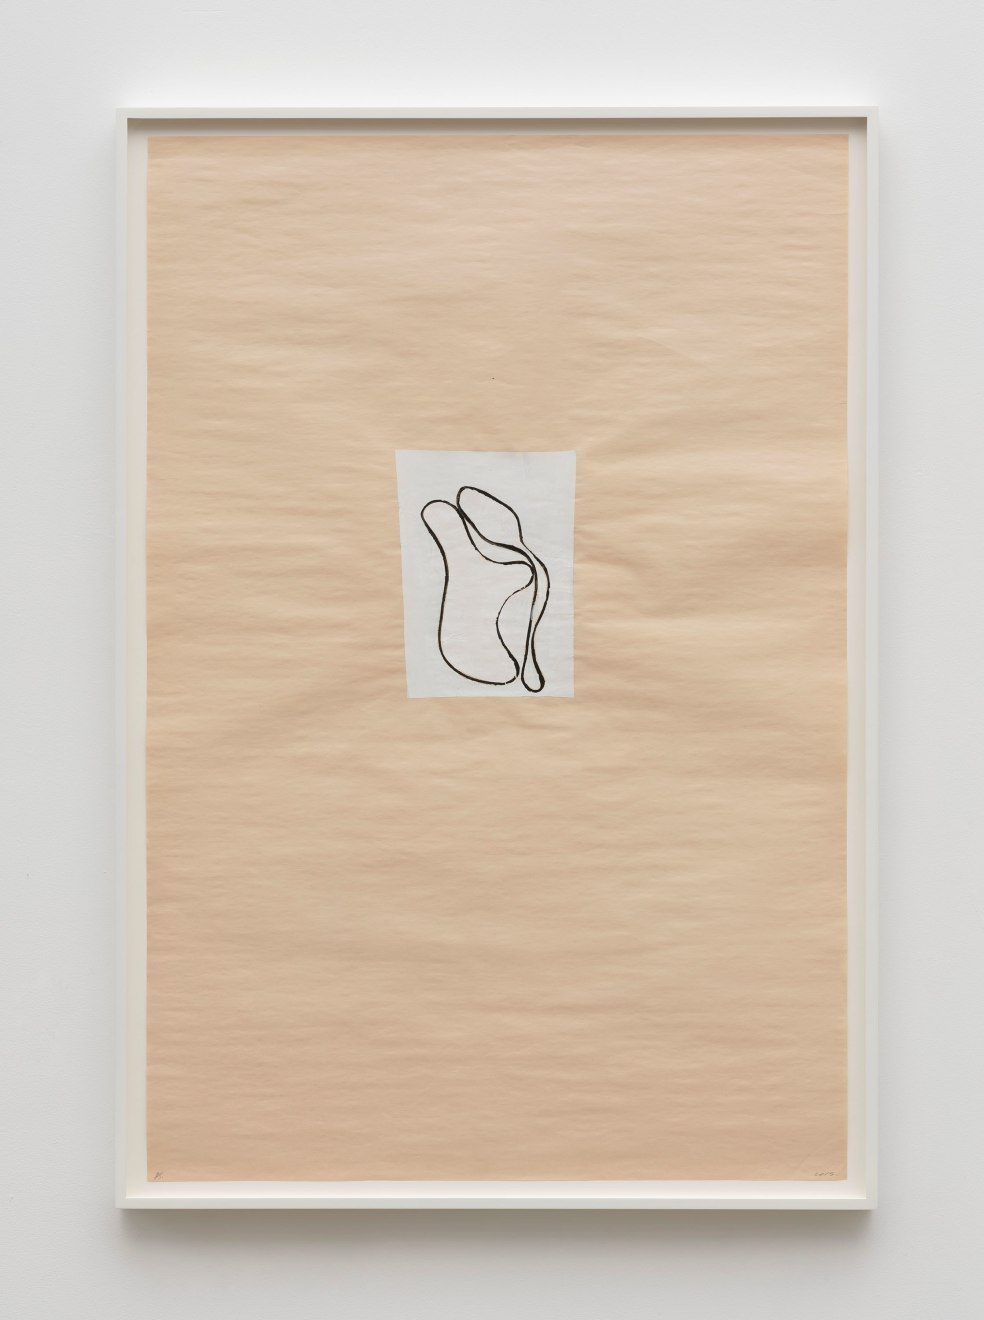 Ricky Swallow, Animal Forms (Paired), 2015